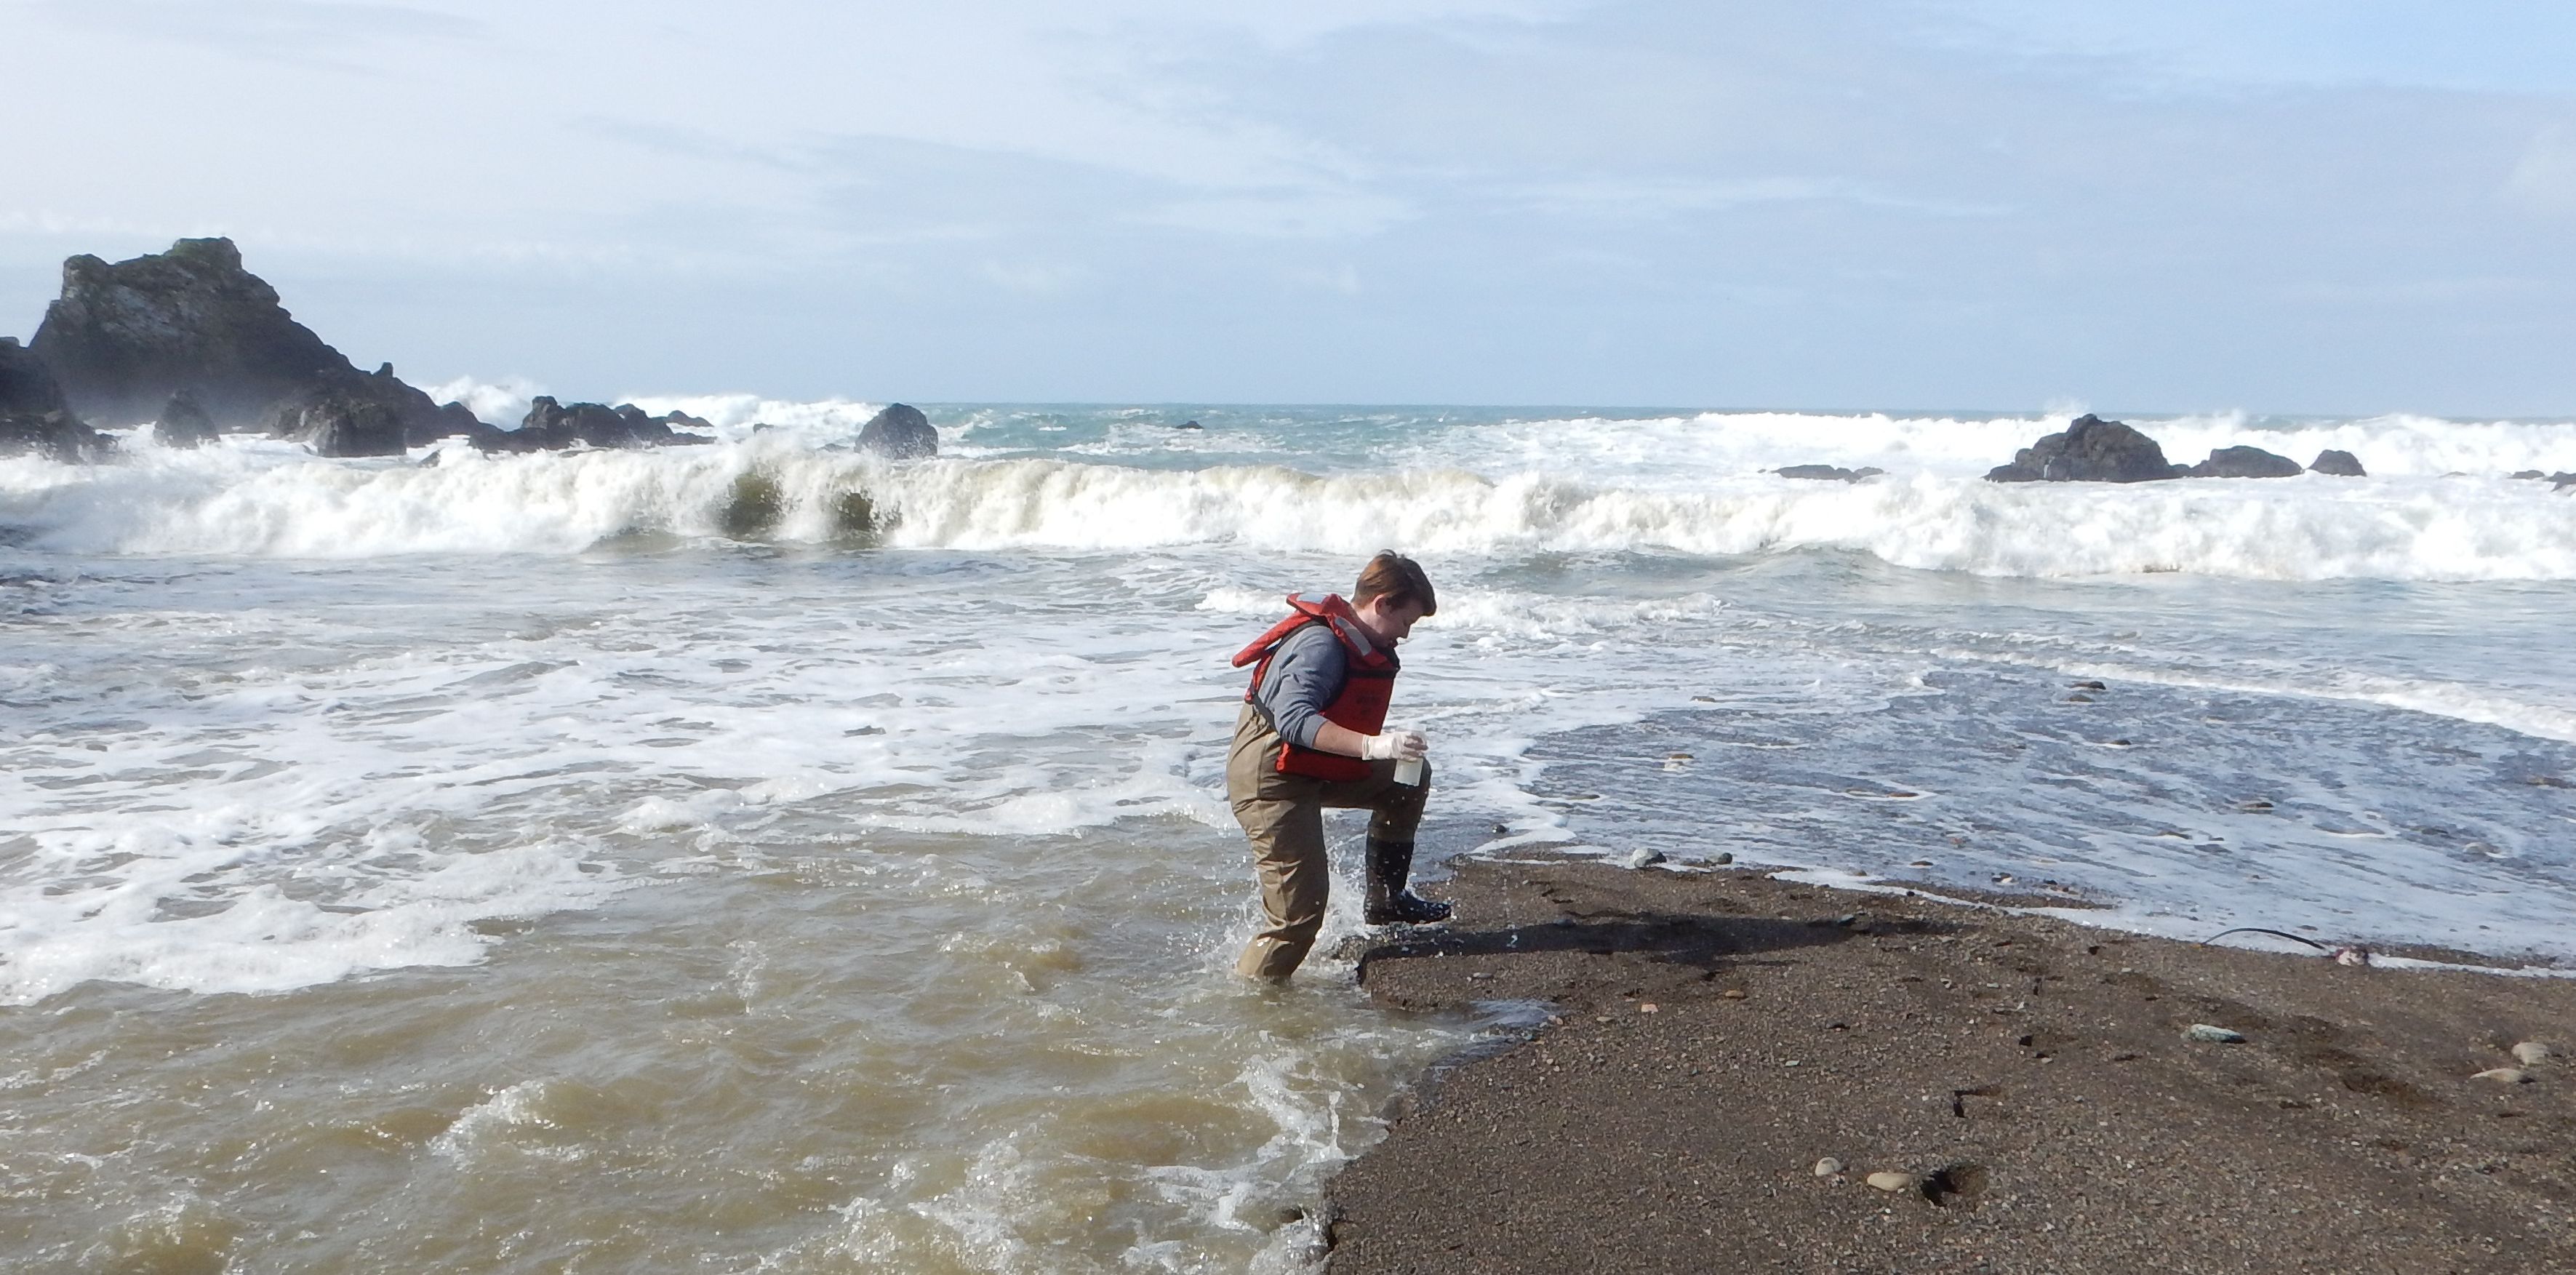 member of the Watershed Stewardship Program collecting water samples for fecal indicator bacteria analysis from the Stillwater Cove in Sonoma County